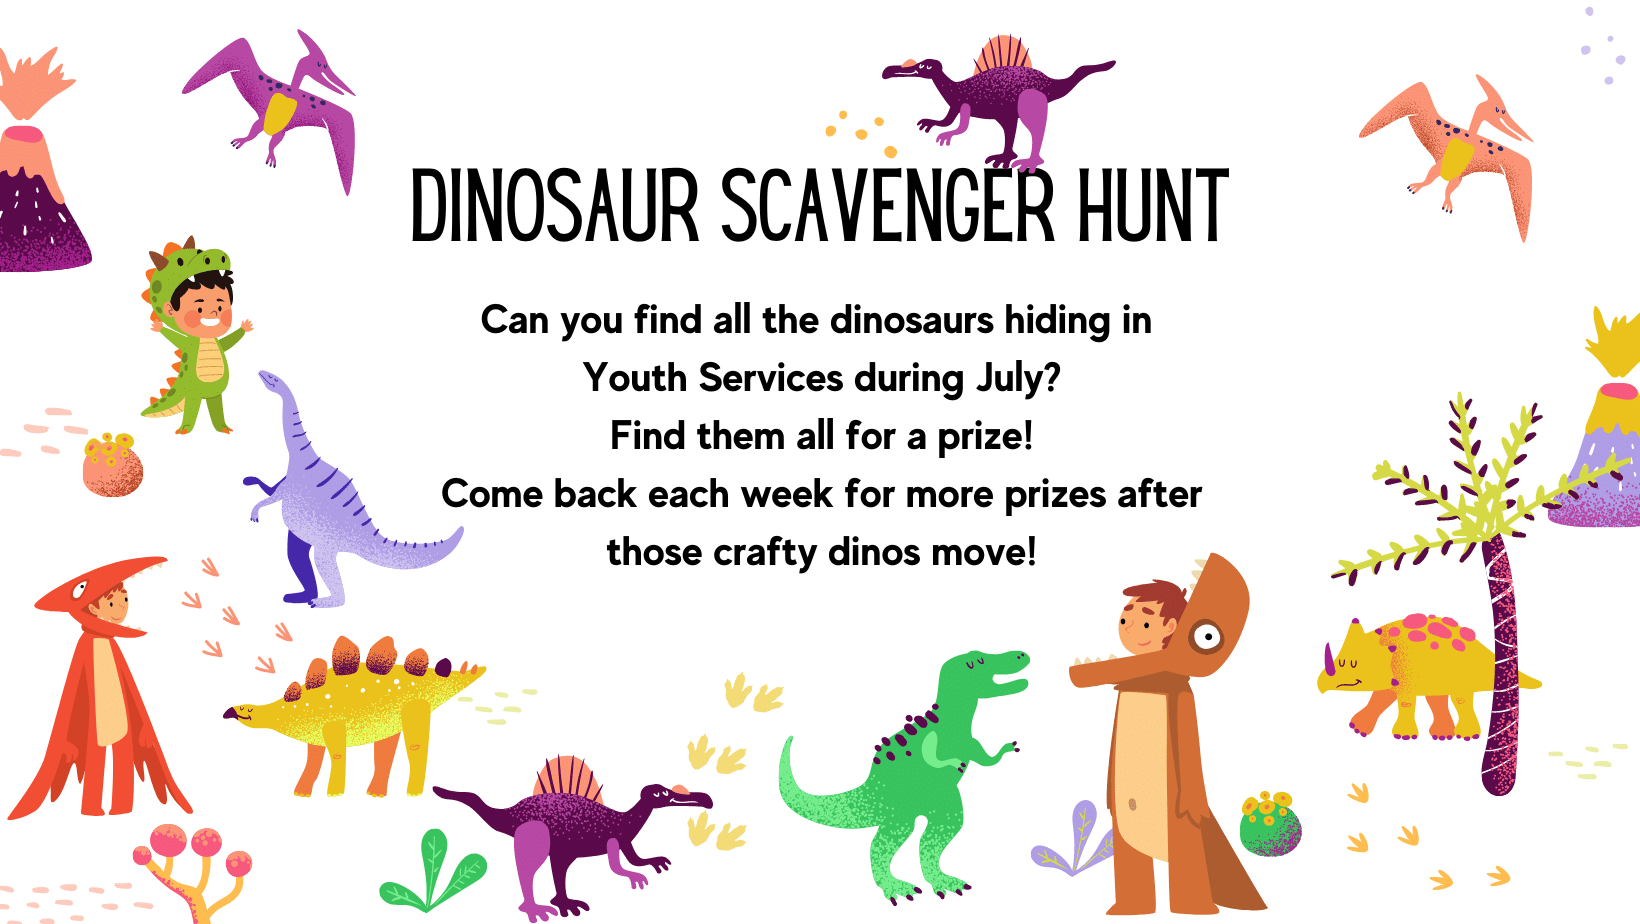 Dinosaur Scavenger Hunt, throughout July in Youth Services